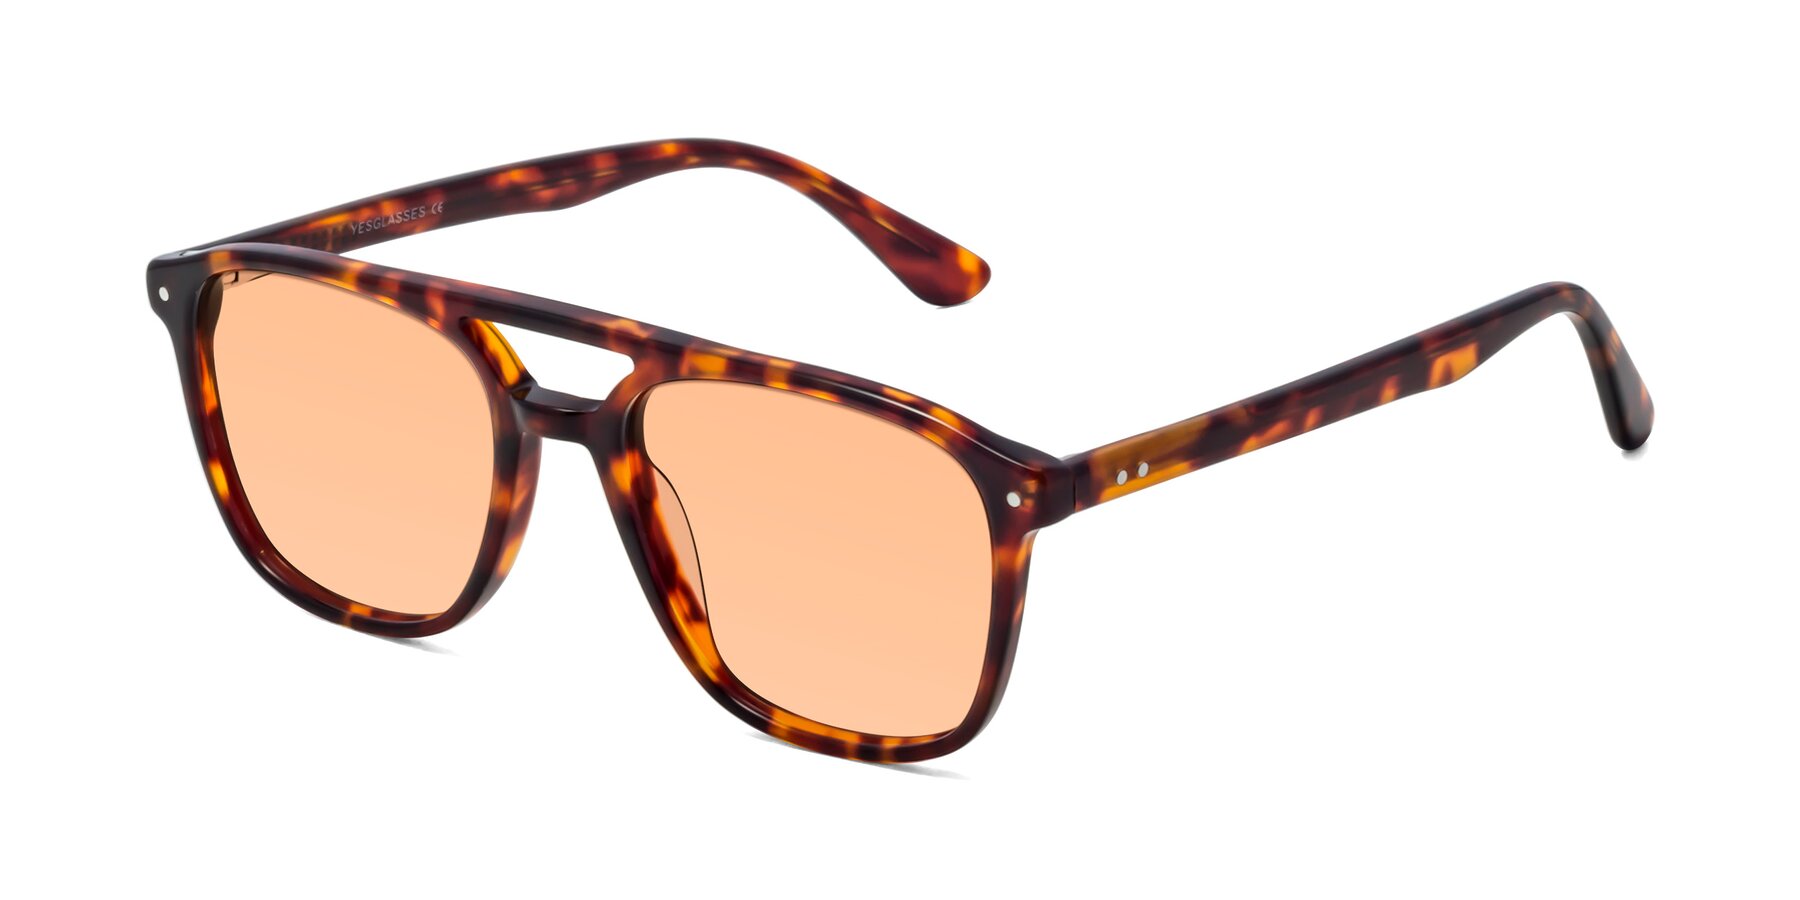 Angle of Quantum in Tortoise with Light Orange Tinted Lenses